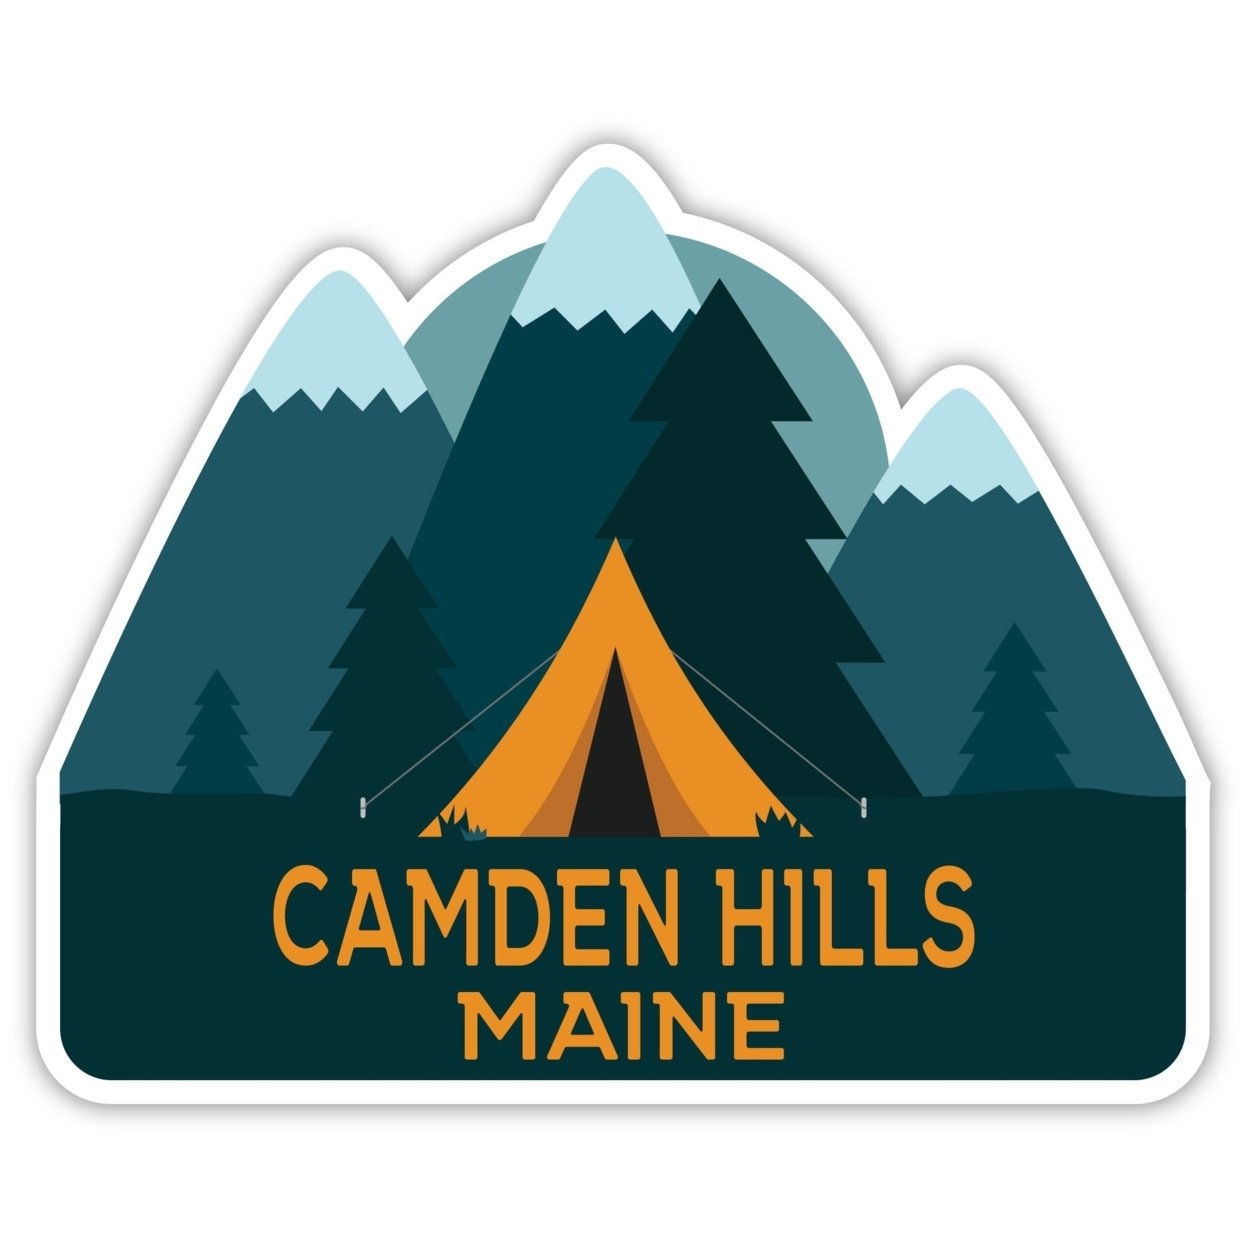 Camden Hills Maine Souvenir Decorative Stickers (Choose Theme And Size) - 4-Pack, 6-Inch, Tent